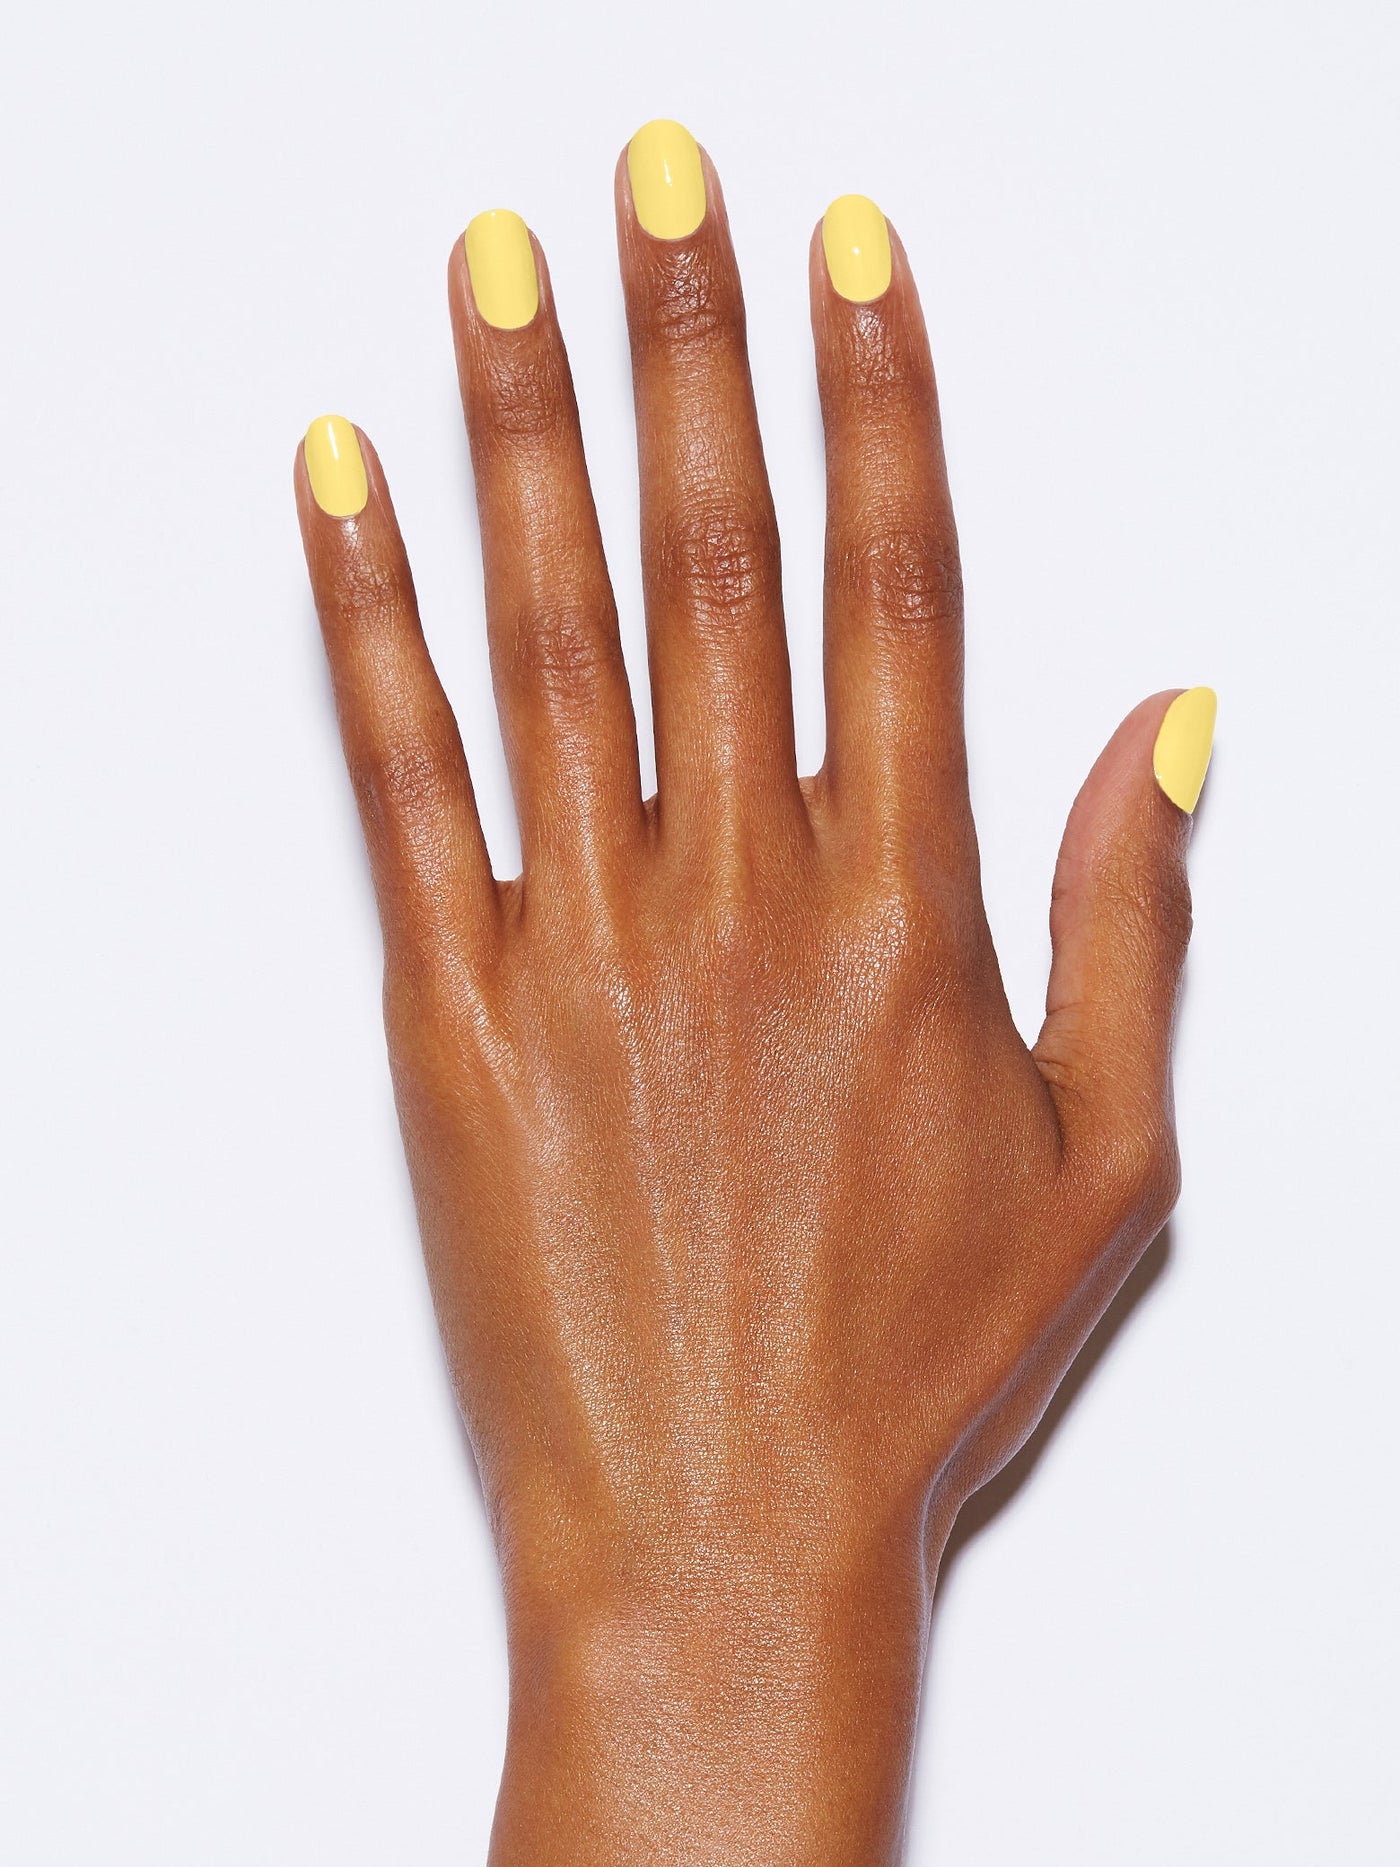 Sunny yellow, Full coverage, Rich